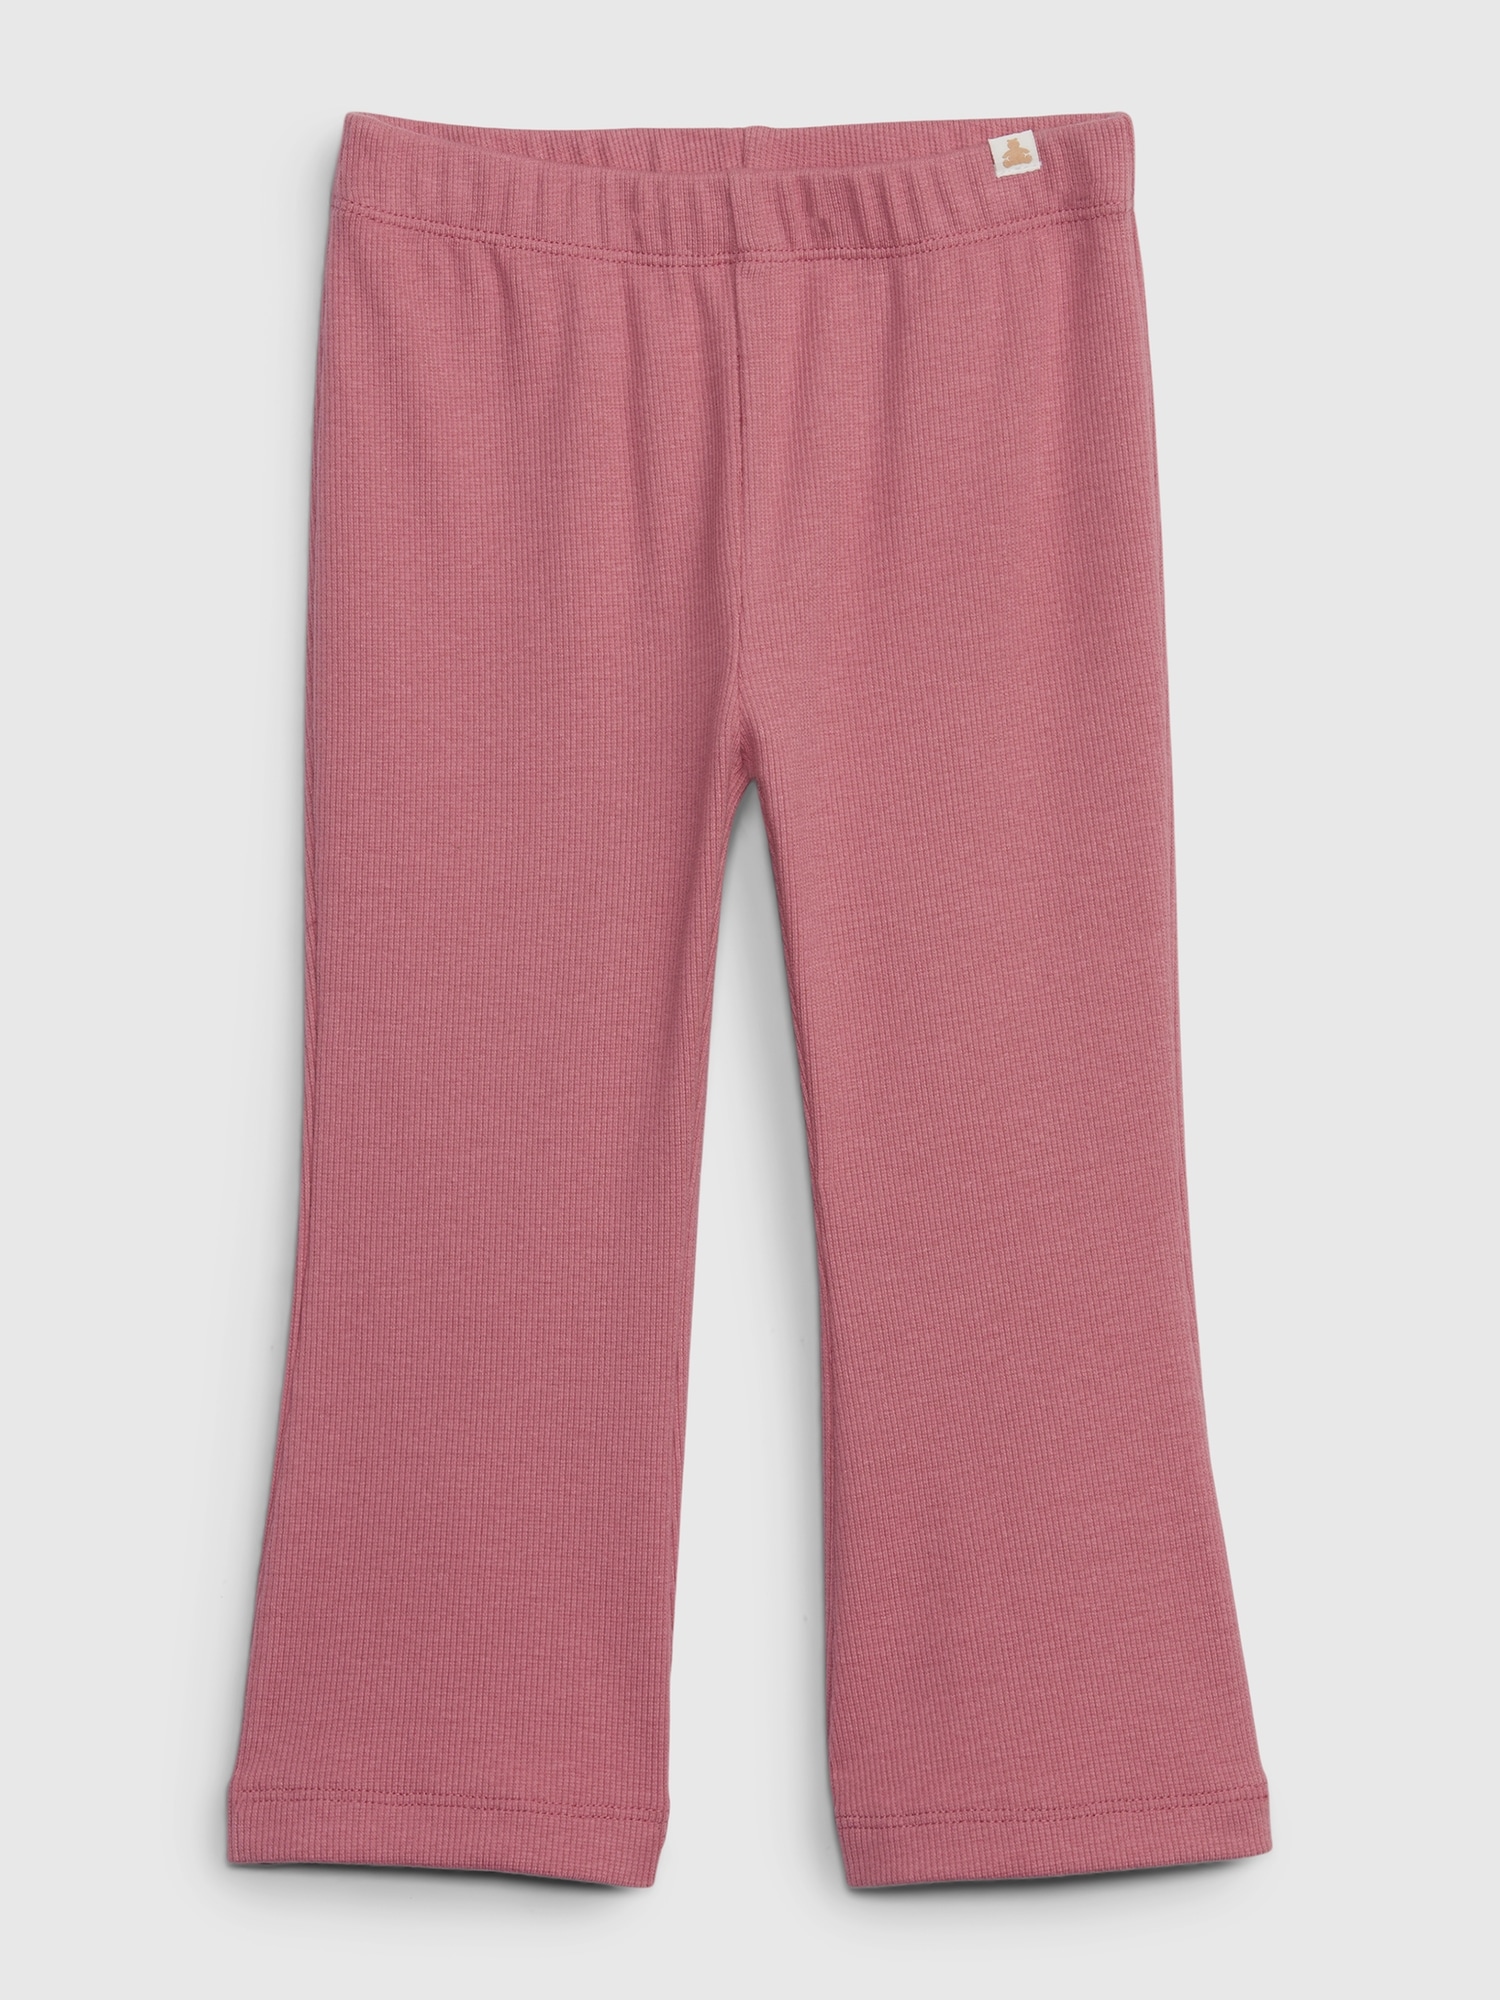 Ankle Fit Mixed Cotton with Spandex Stretchable Leggings Pink